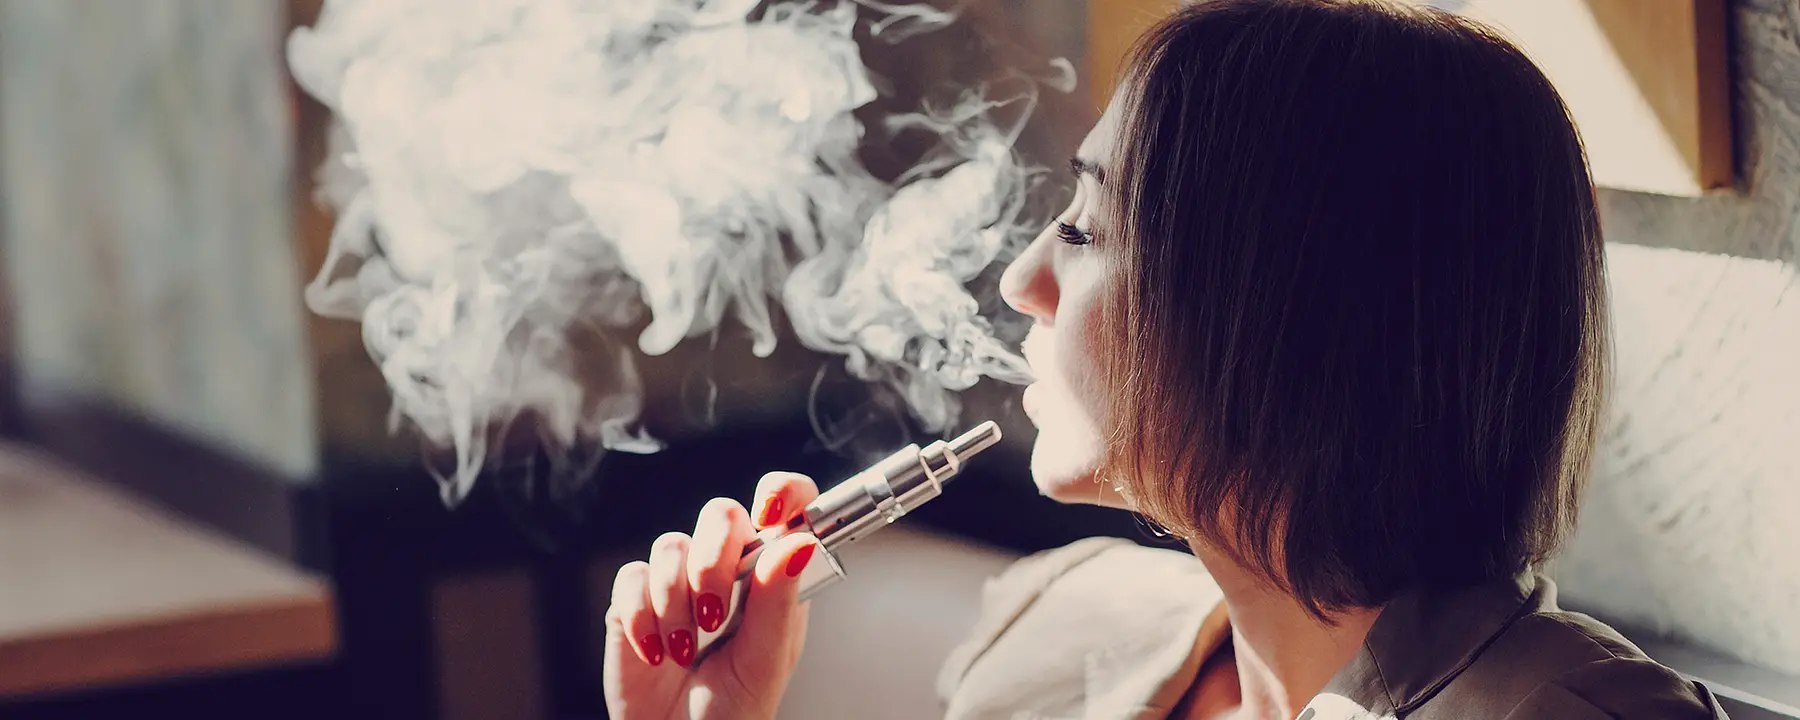 A woman vaping with an e-cigarette indoors